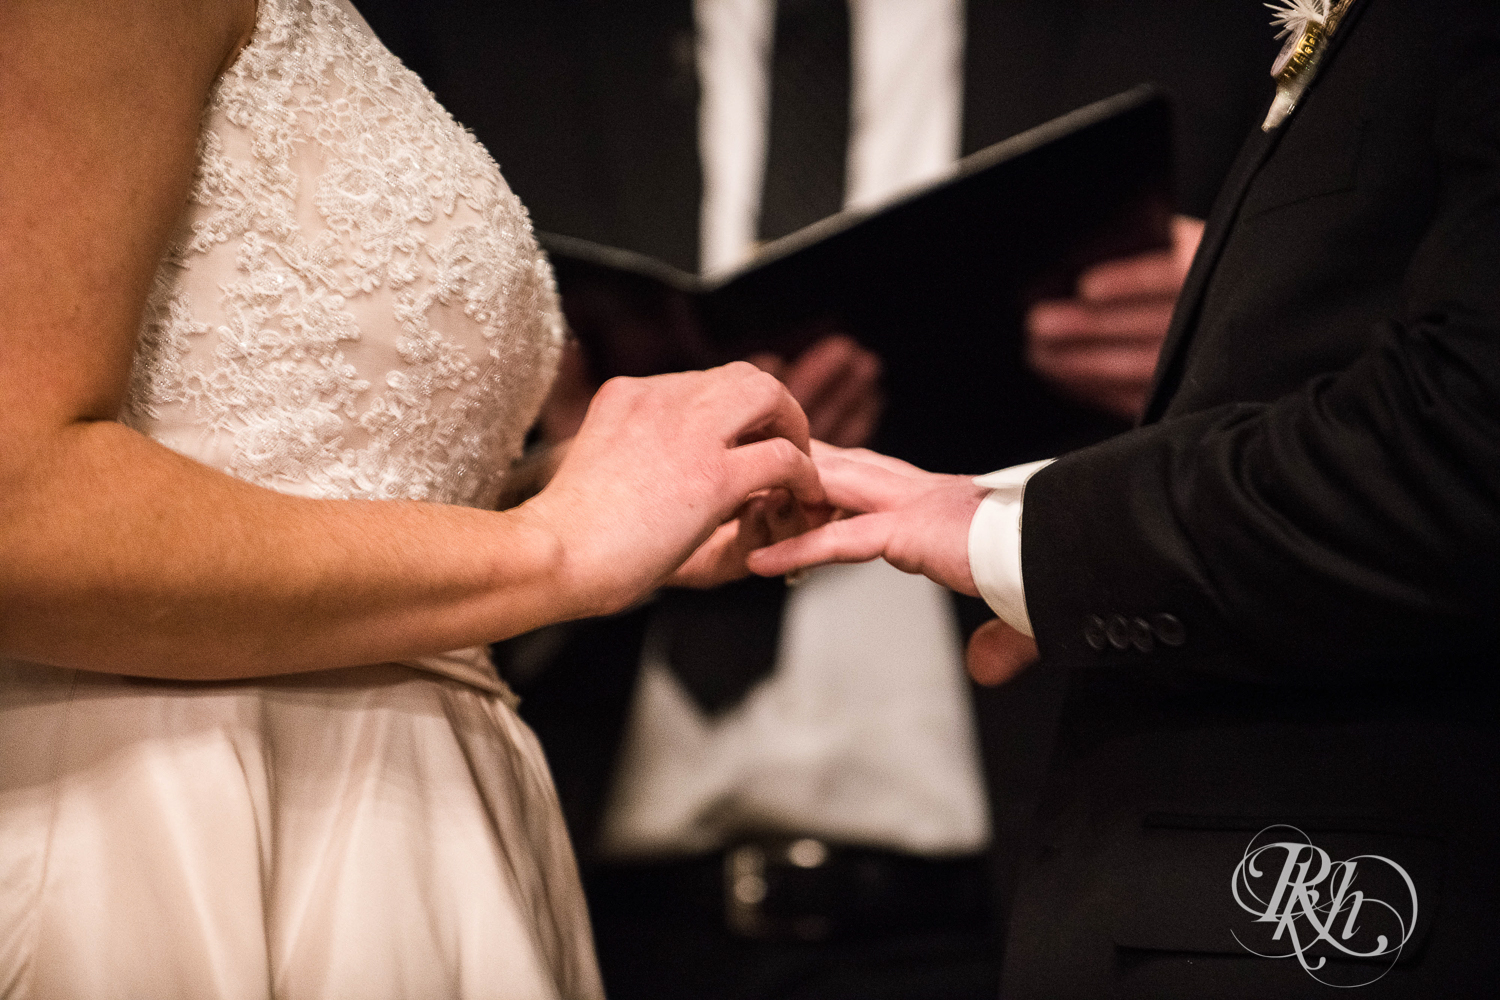 Bride and groom exchange rings during new year's eve wedding ceremony at Creekside Farm in Rush City, Minnesota.